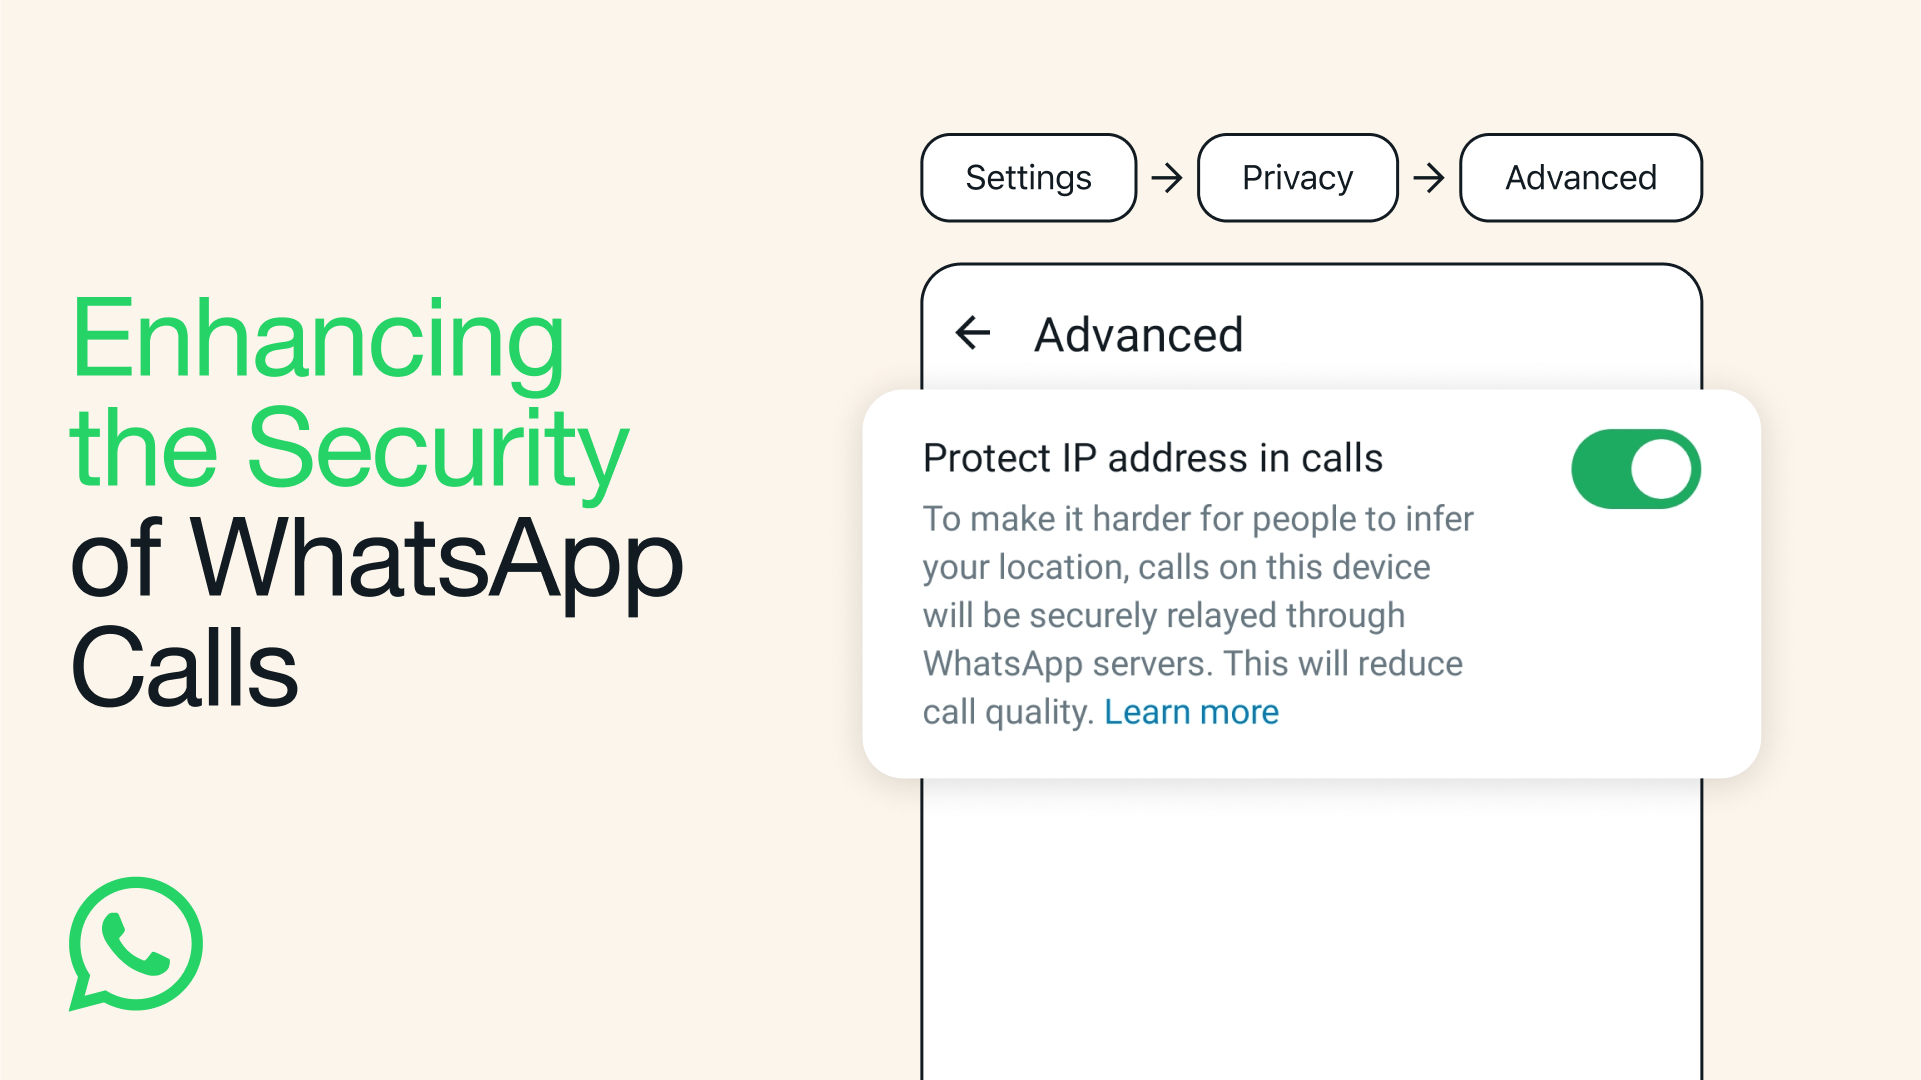 WhatsApp Claims The New Security Feature Will Enable Users To Secure IP Address Metadata During Calls